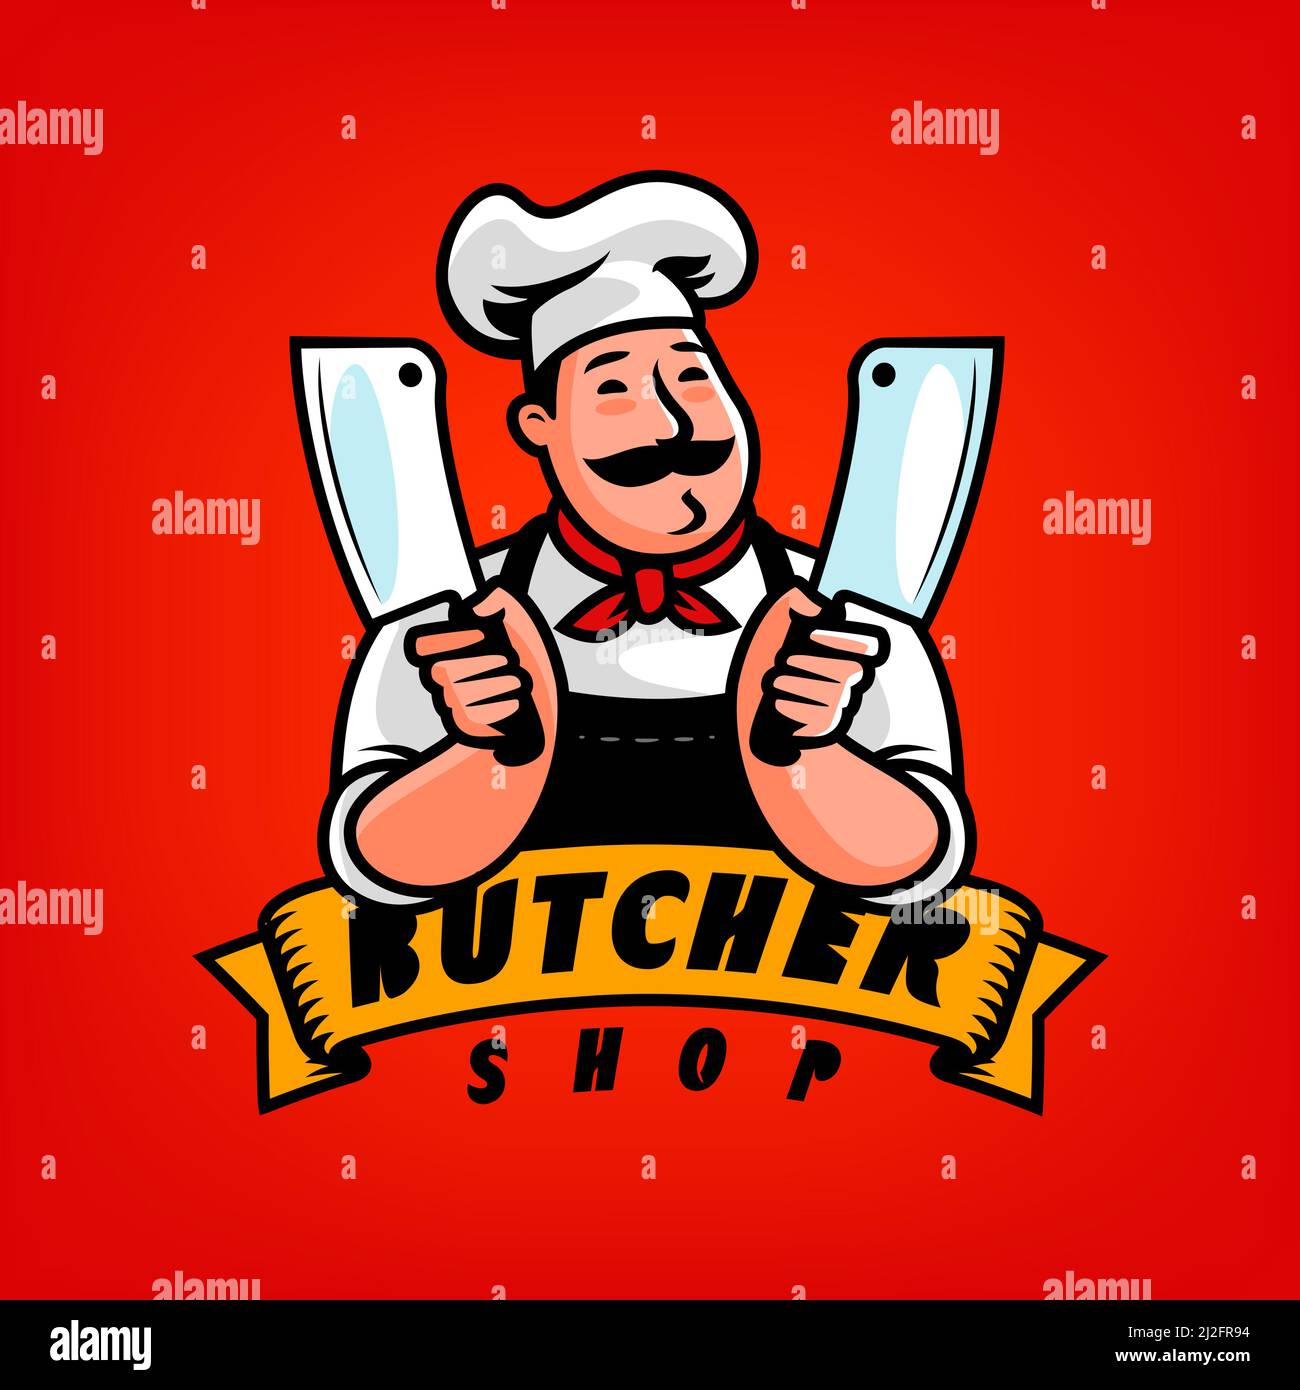 Butcher shop logo emblem for design. Funny Chef with cleaver cartoon character vector illustration Stock Vector